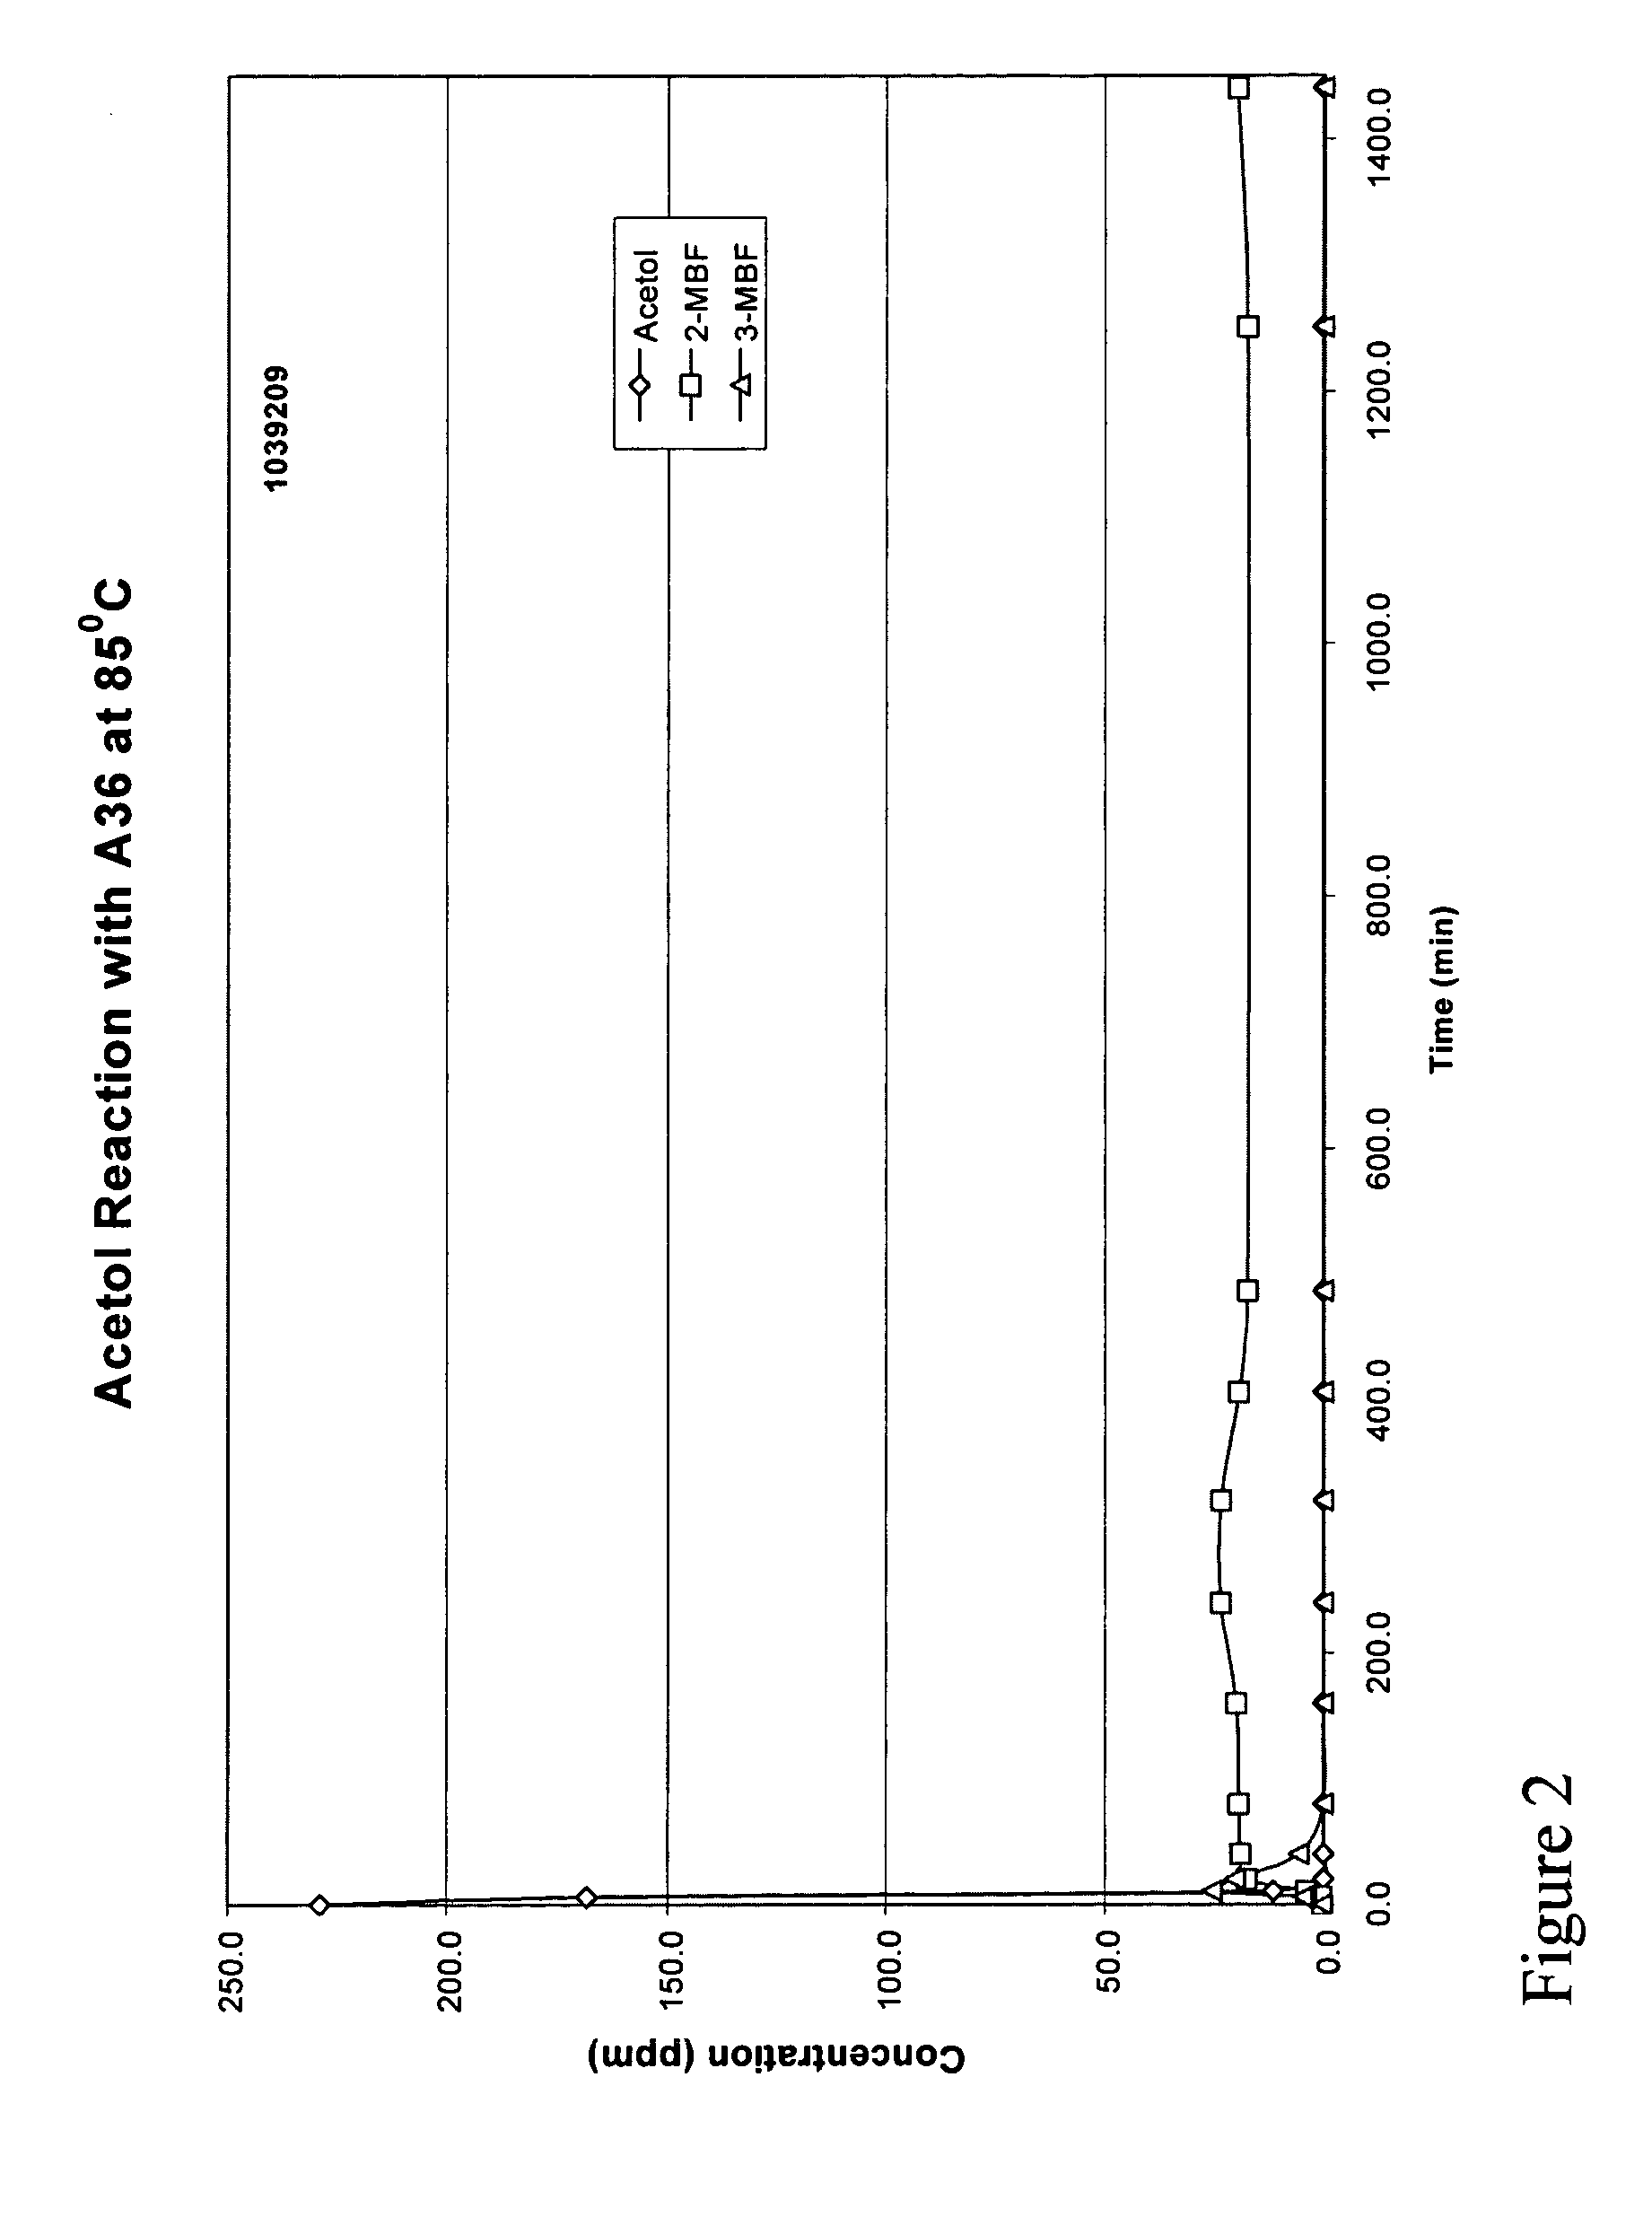 Method for removal of acetol from phenol